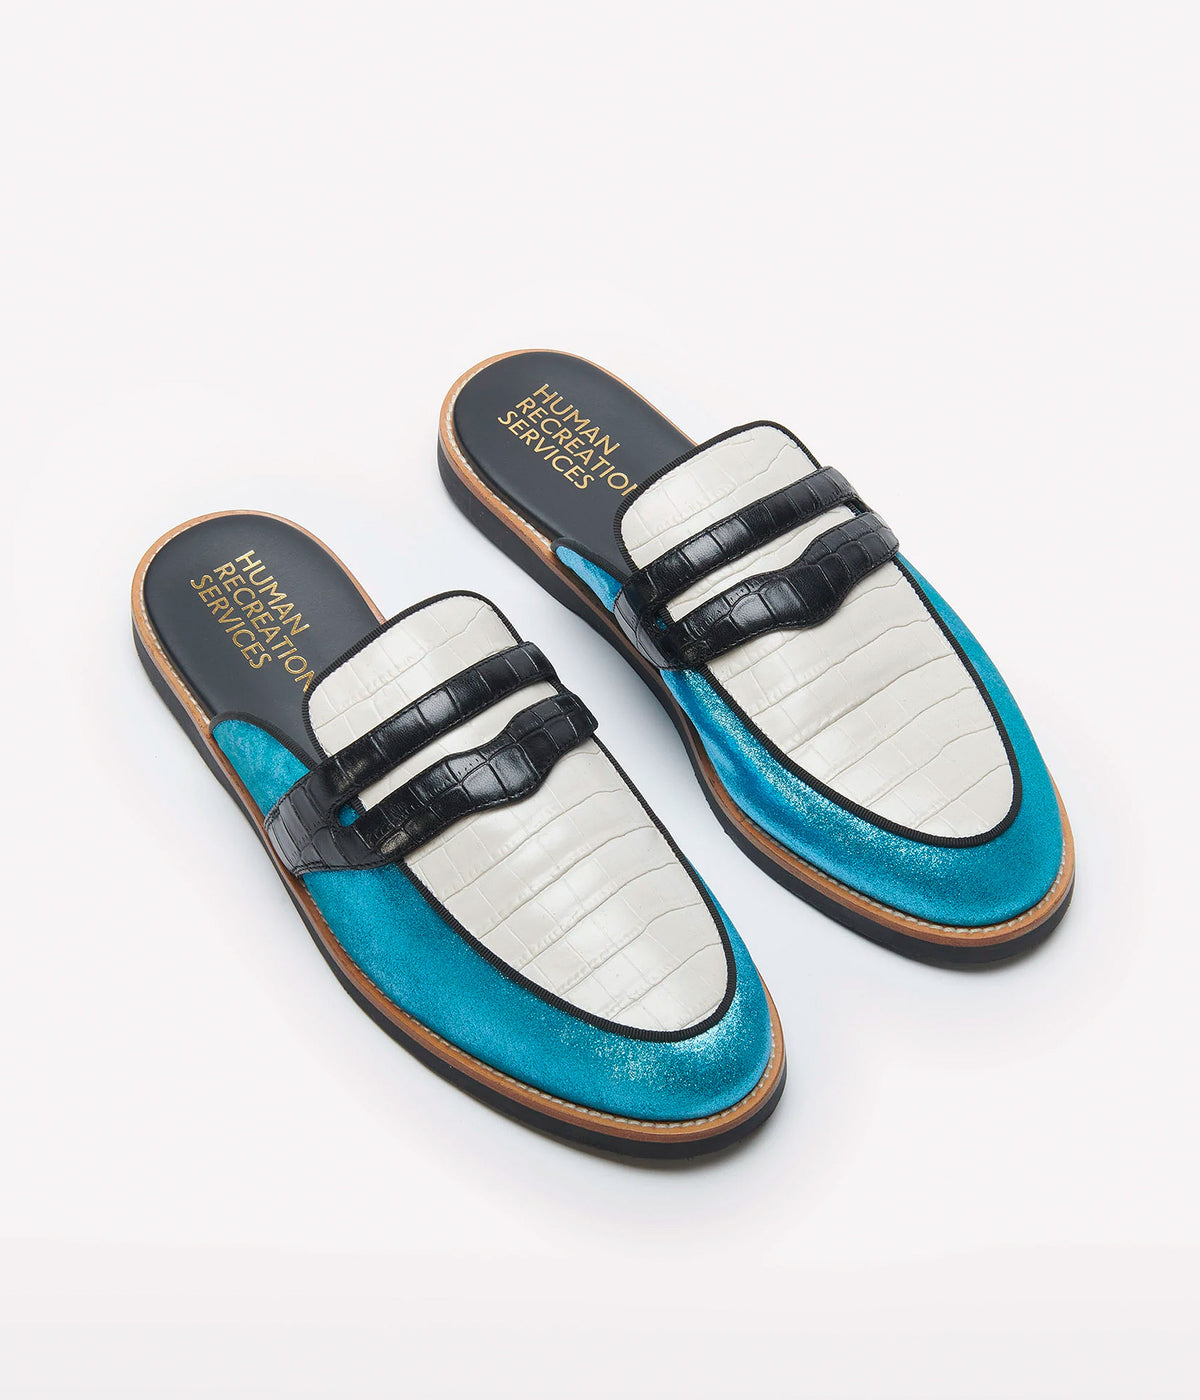 HUMAN RECREATIONAL SERVICES PALAZZO SLIPPER IN BLACK BONE AND LIGHT BLUE MADE WITH ITALIAN CALF SKIN